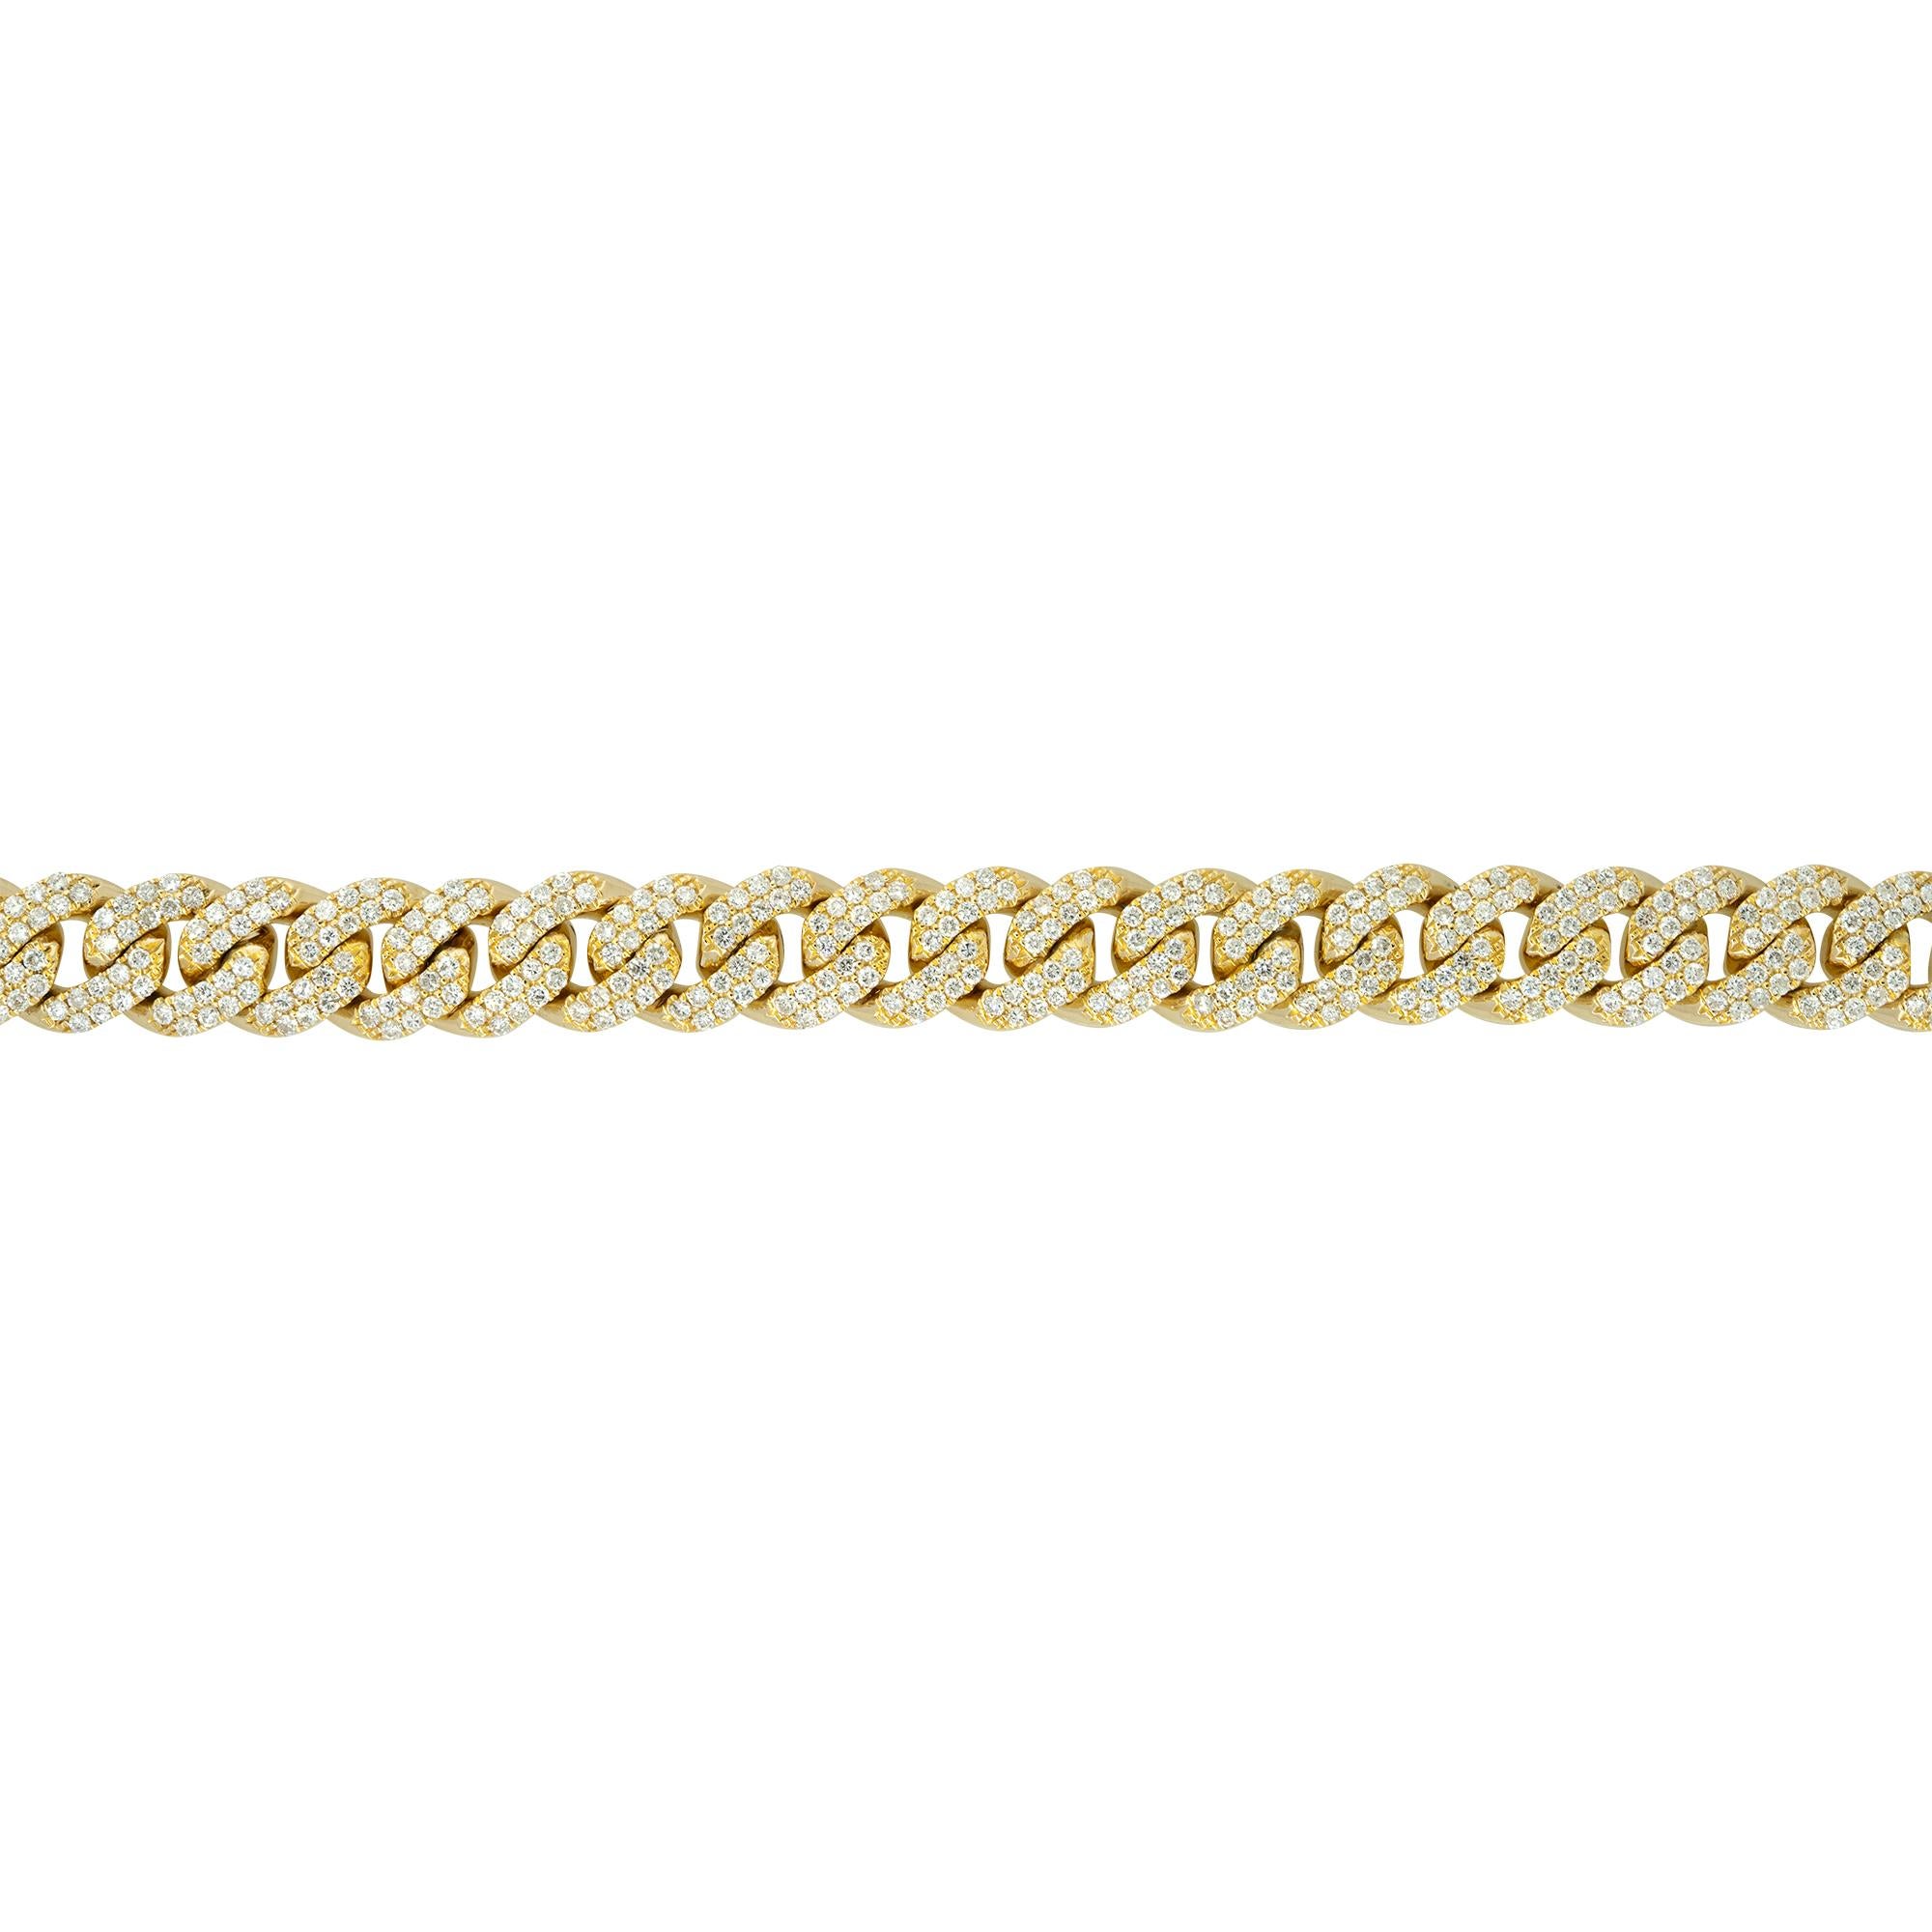 14k Yellow Gold 5.71ctw Pave Diamond Cuban Link Bracelet
Material: 14k Yellow Gold
Diamond Details: Approximately 5.71ctw of Round Brilliant Diamonds
Bracelet Width: Approximately 9.7mm
Total Weight: 40.5g (26.2dwt) 
Size: 8